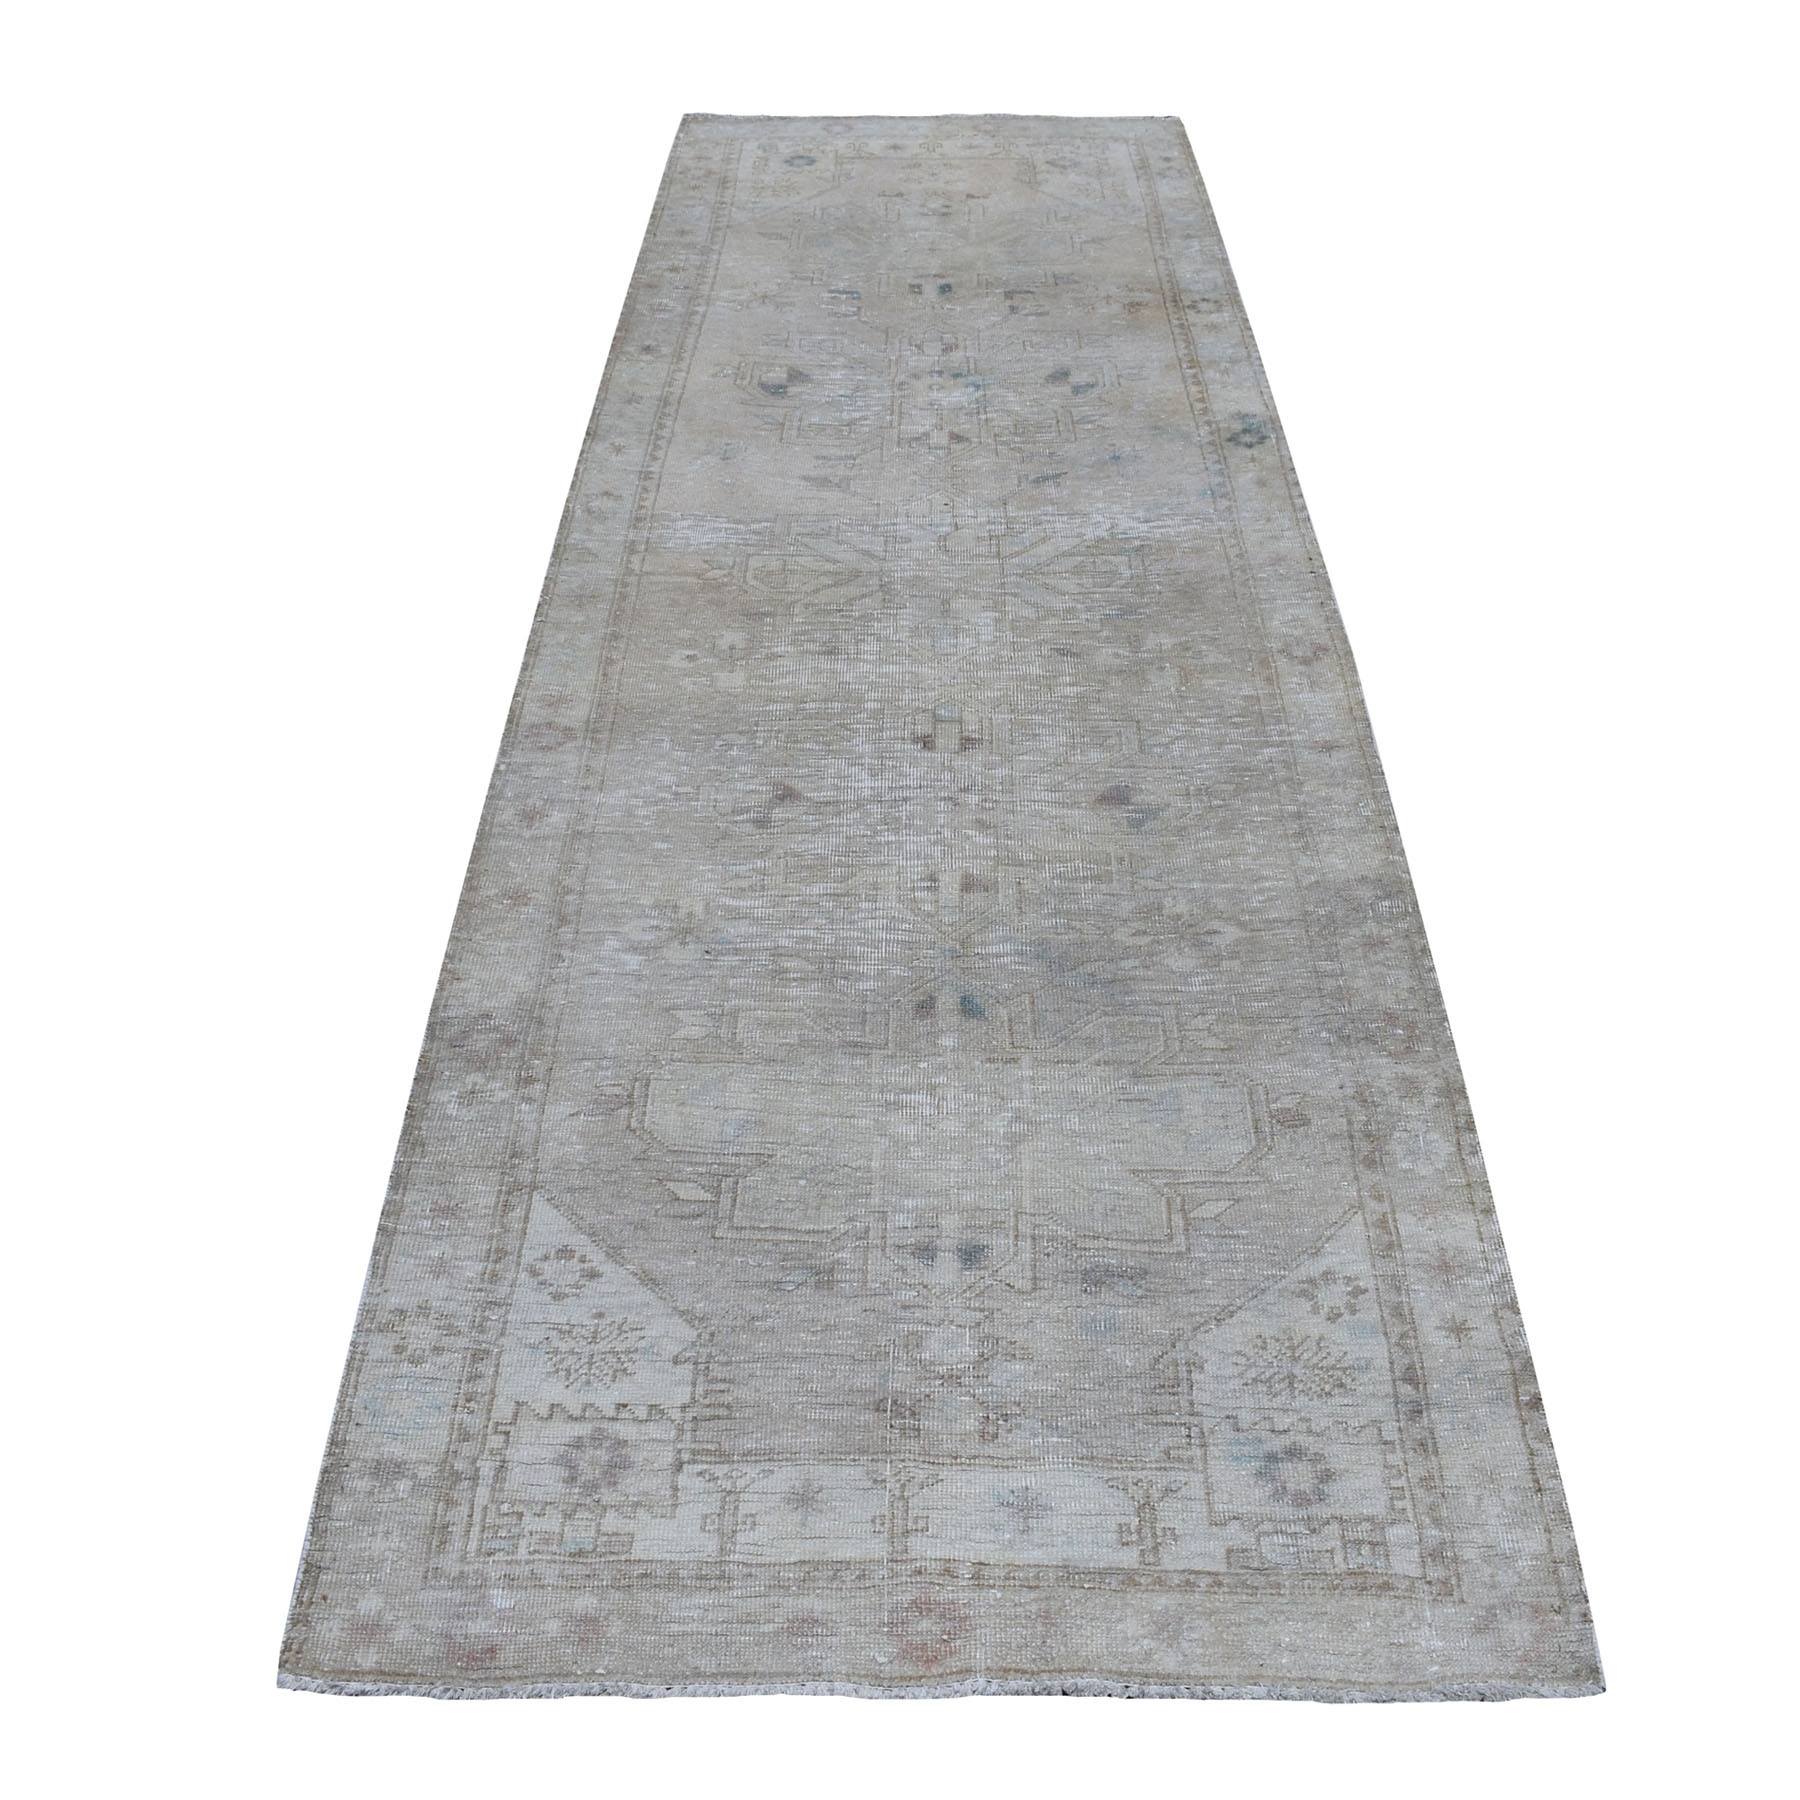 3'5"X9'10" Vintage And Worn Down Distressed Colors Persian Qashqai Wide Runner Hand Knotted Bohemian Rug moaeda0e